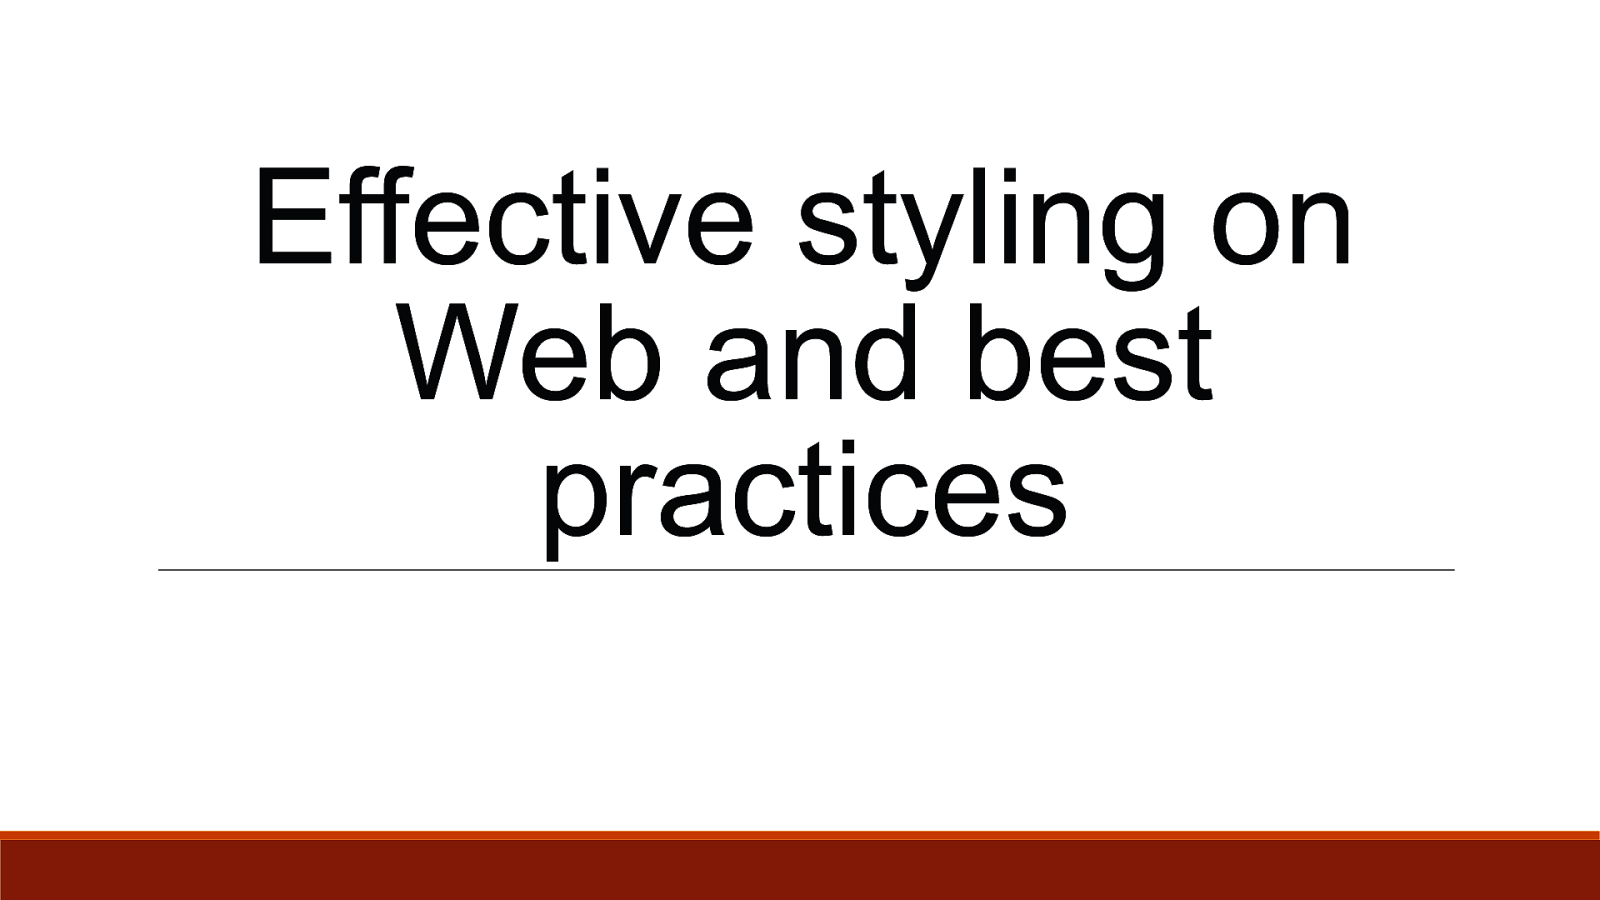 Effective styling on Web and best practices